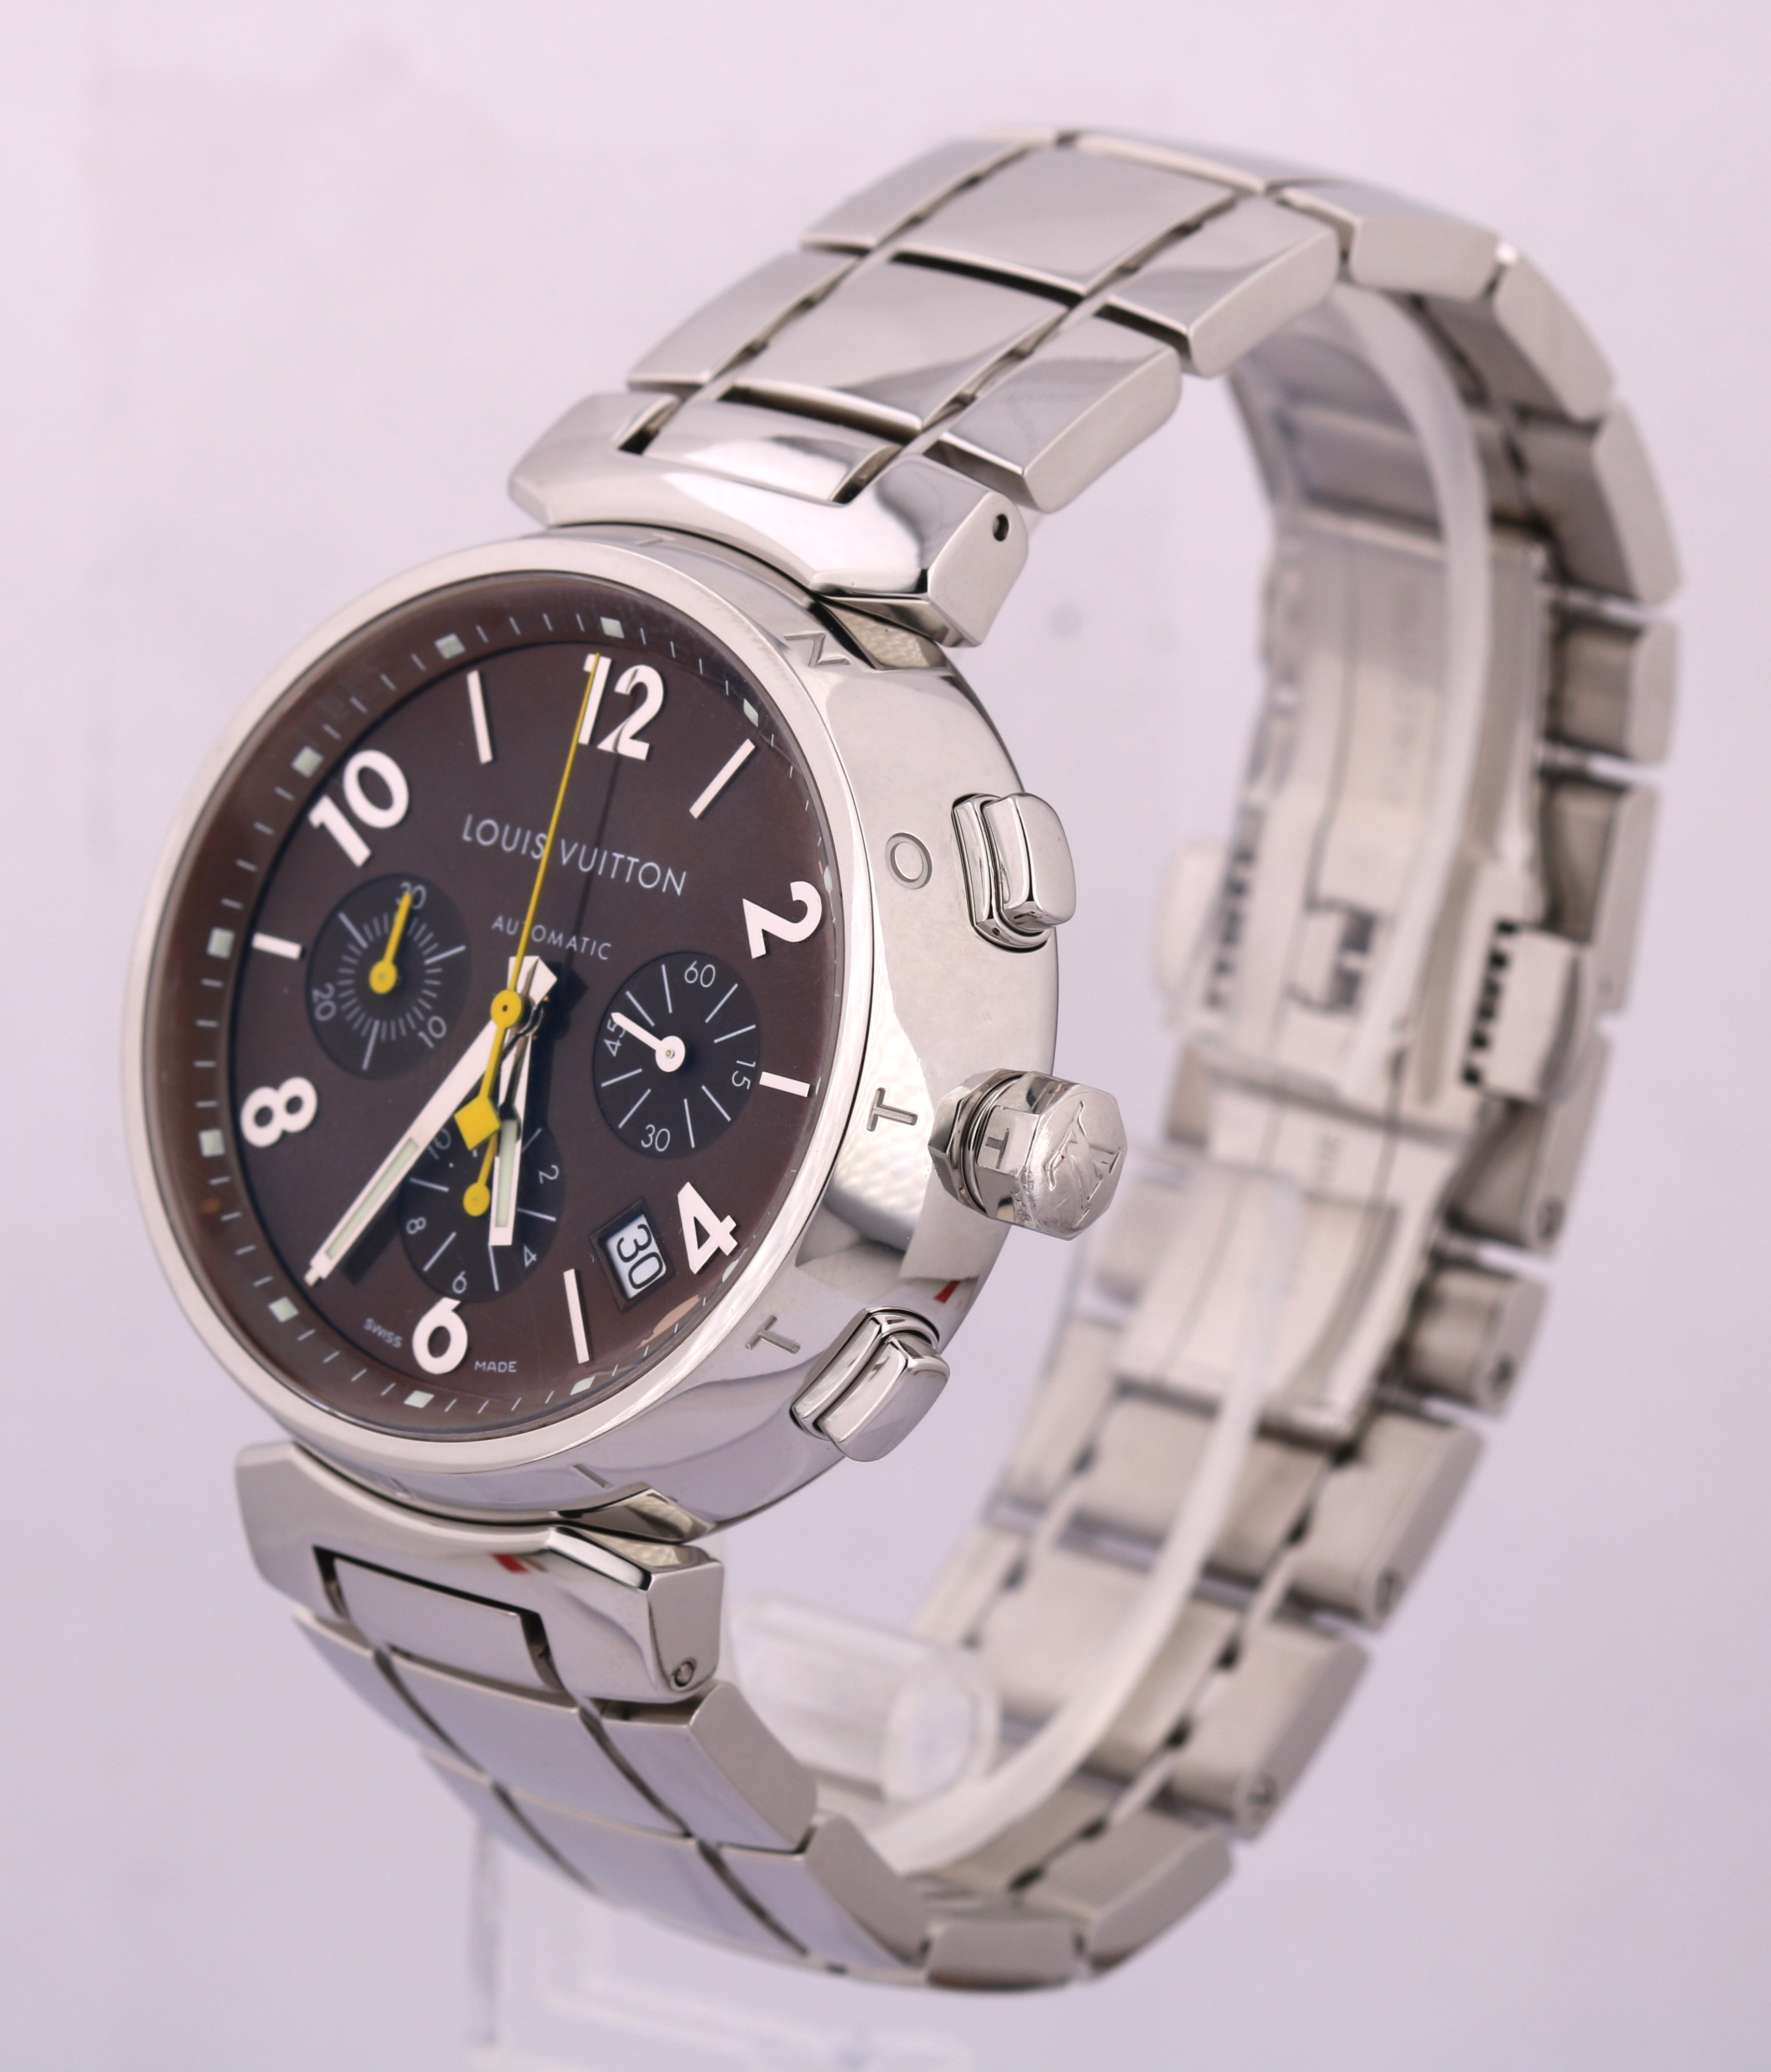 Used Louis Vuitton Reference number Q1121 watches for sale - Buy